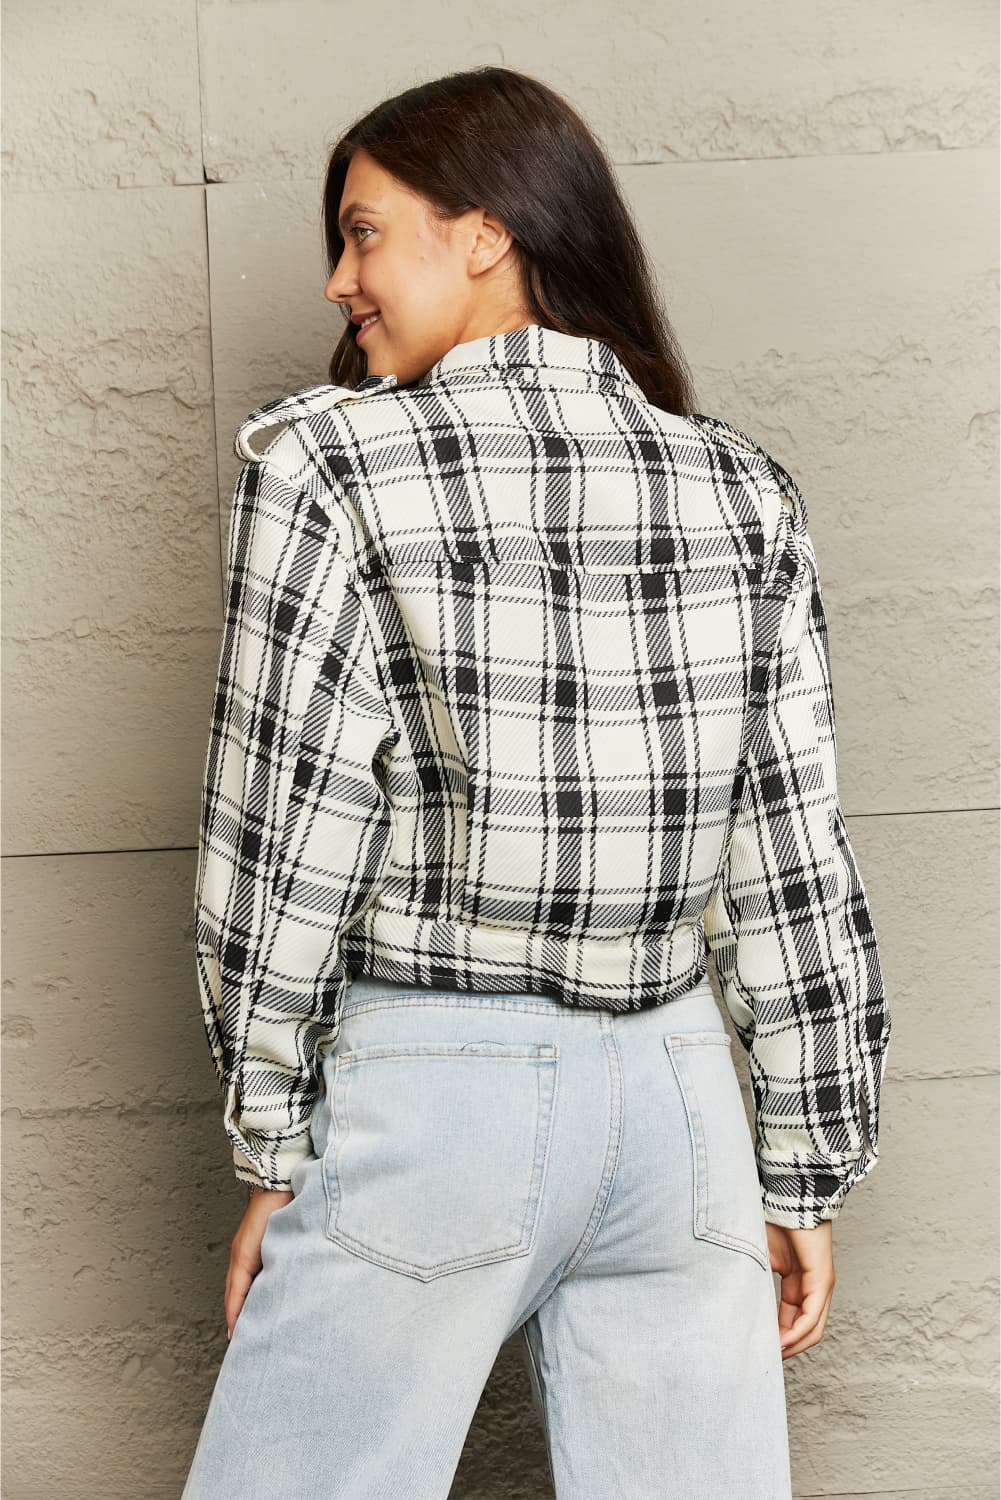 Cuffed Up Plaid Collared Jacket